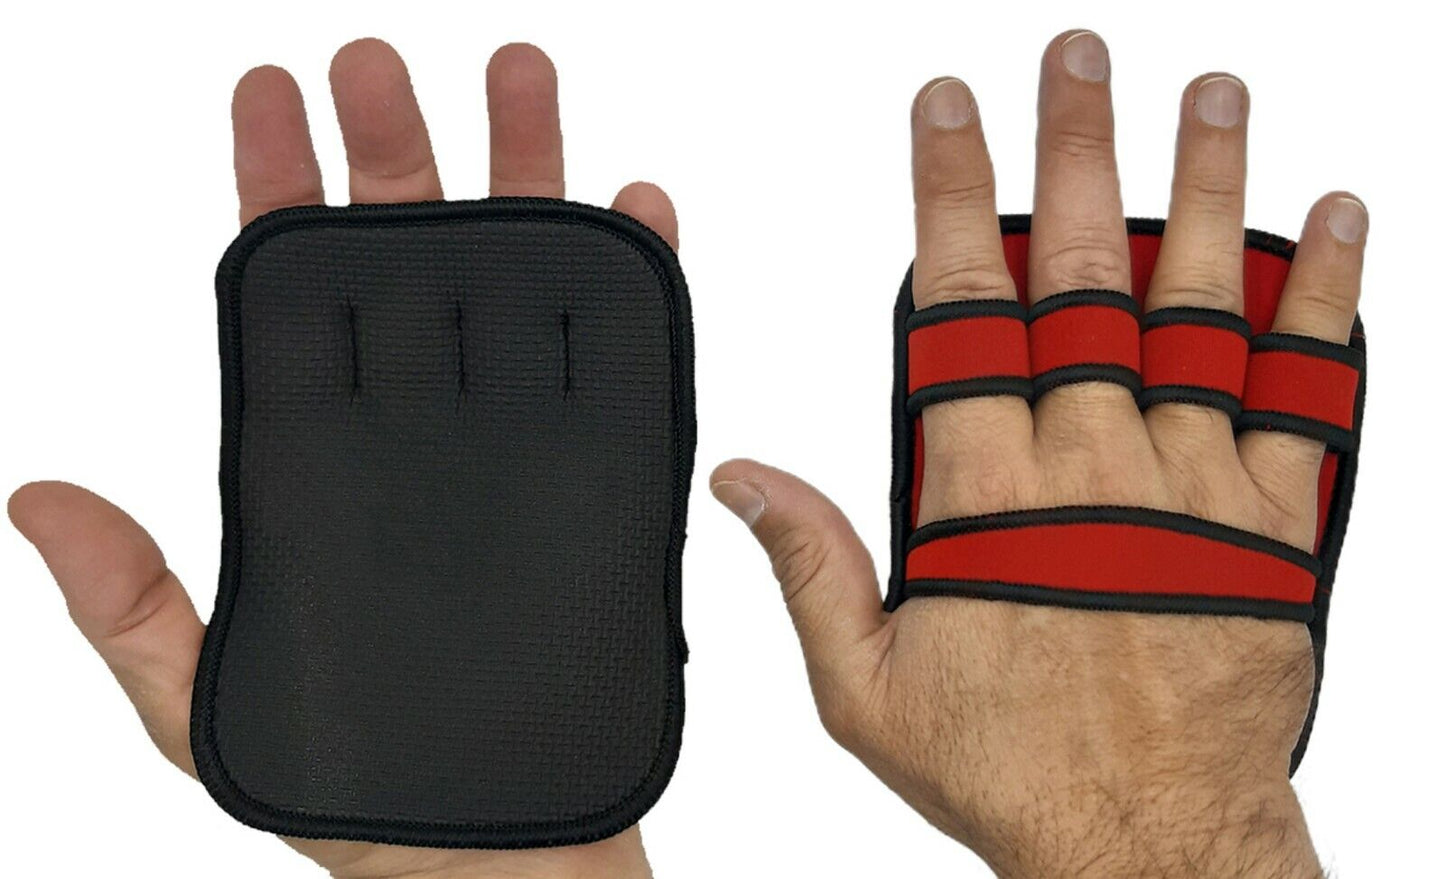 MRX Weightlifting gloves pads gripping Weight Lifting Hand Support